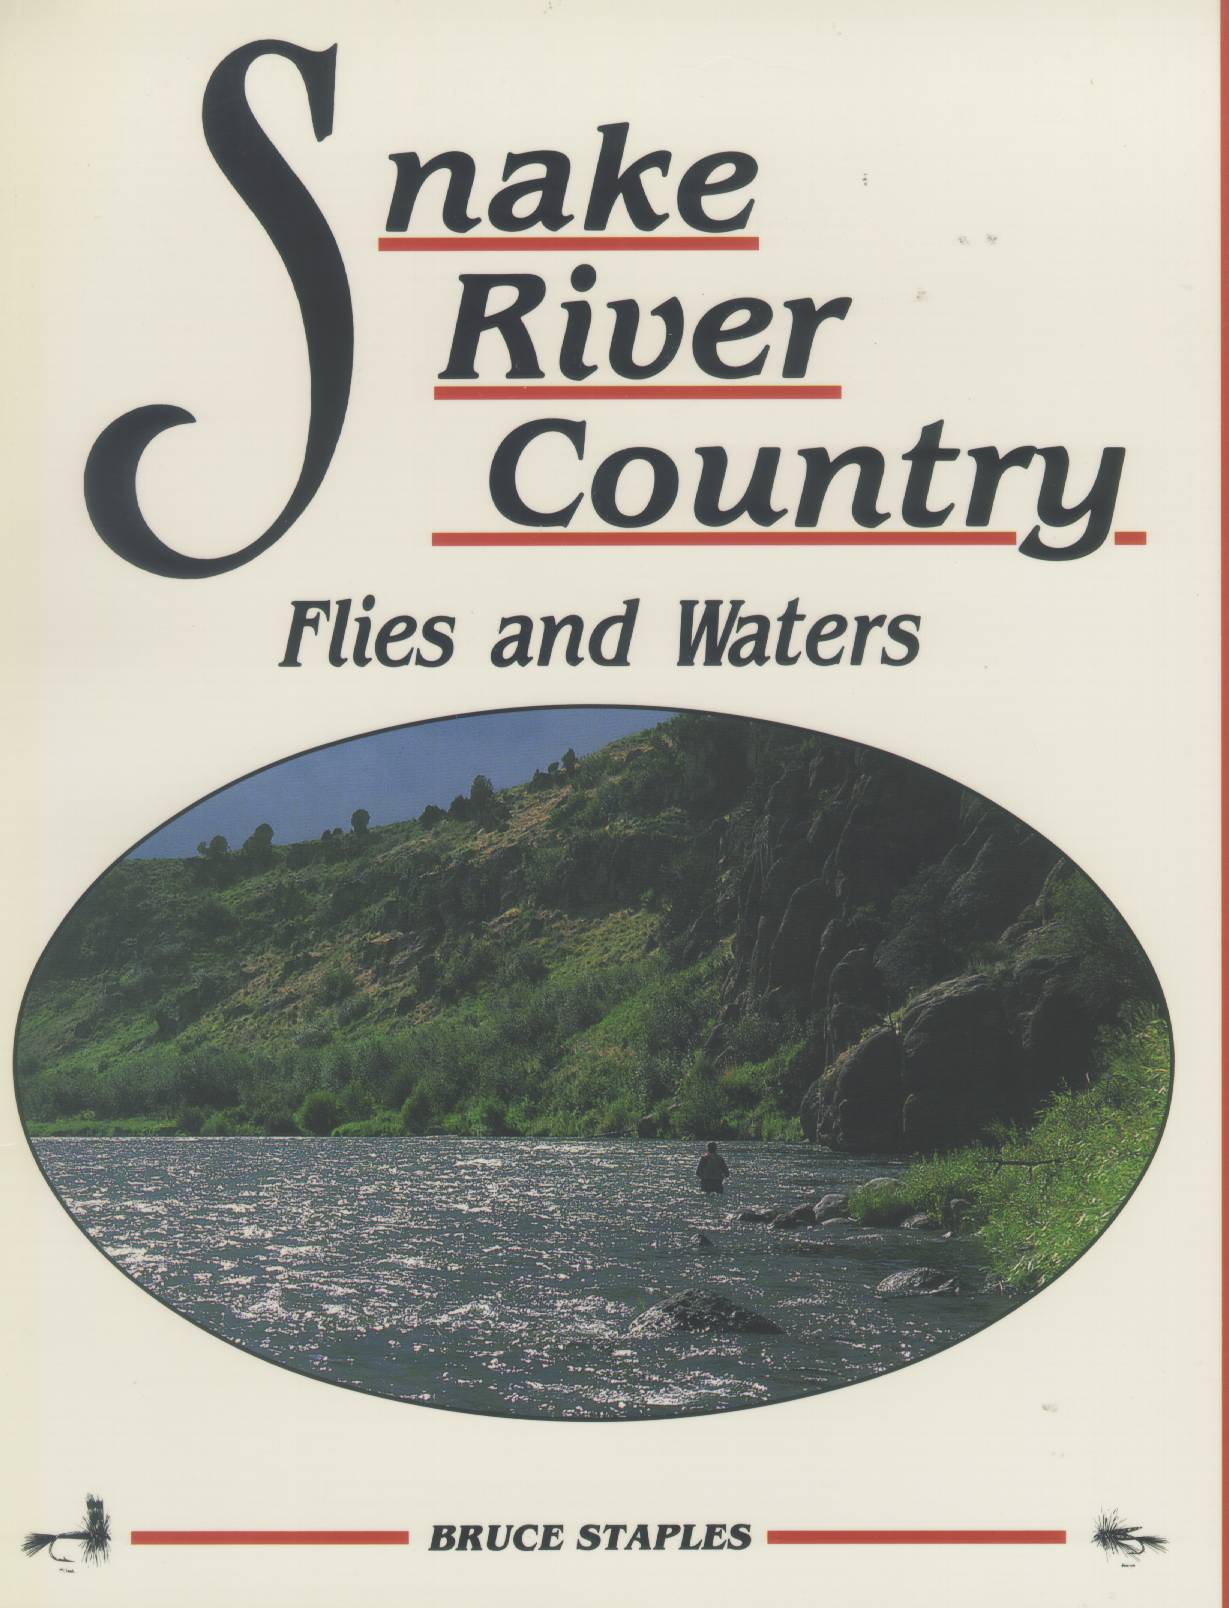 SNAKE RIVER COUNTRY: flies and waters. 